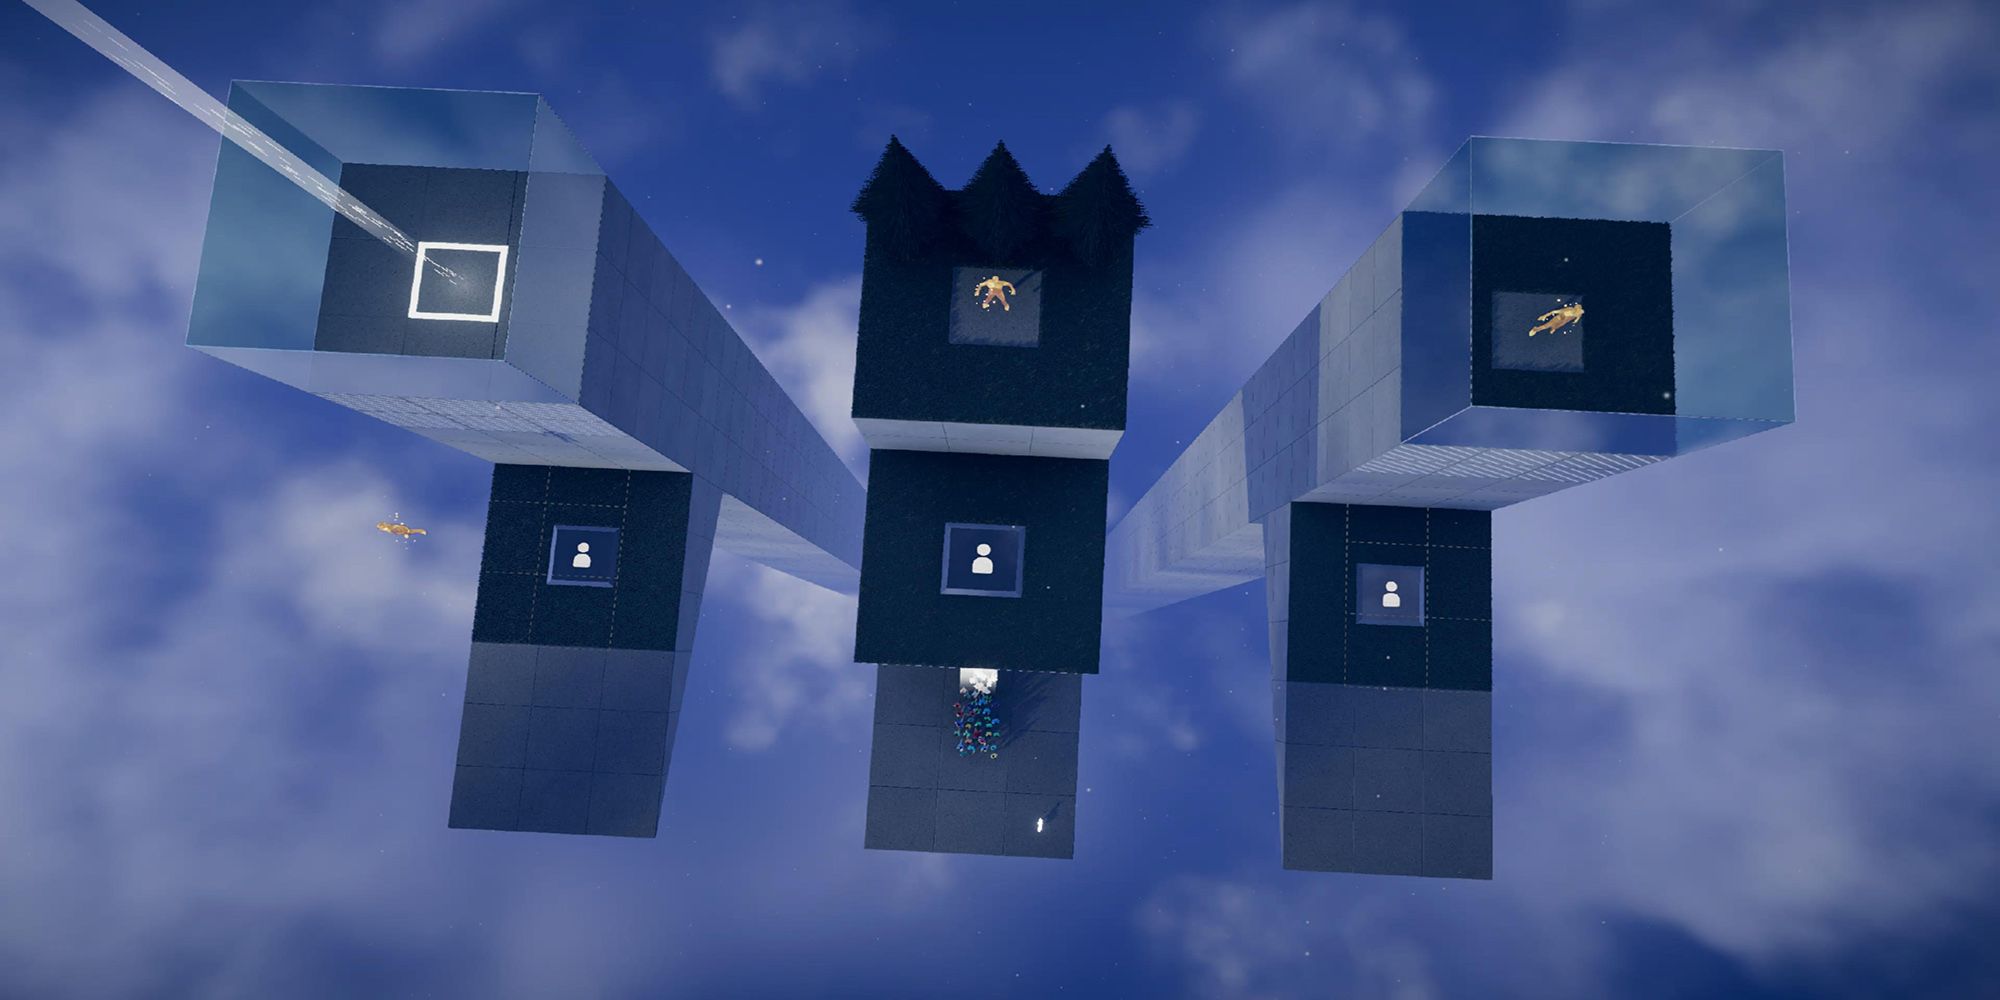 The Three Towers trial of Humanity tasks the player with guiding humans across three people switches separated among three towers.